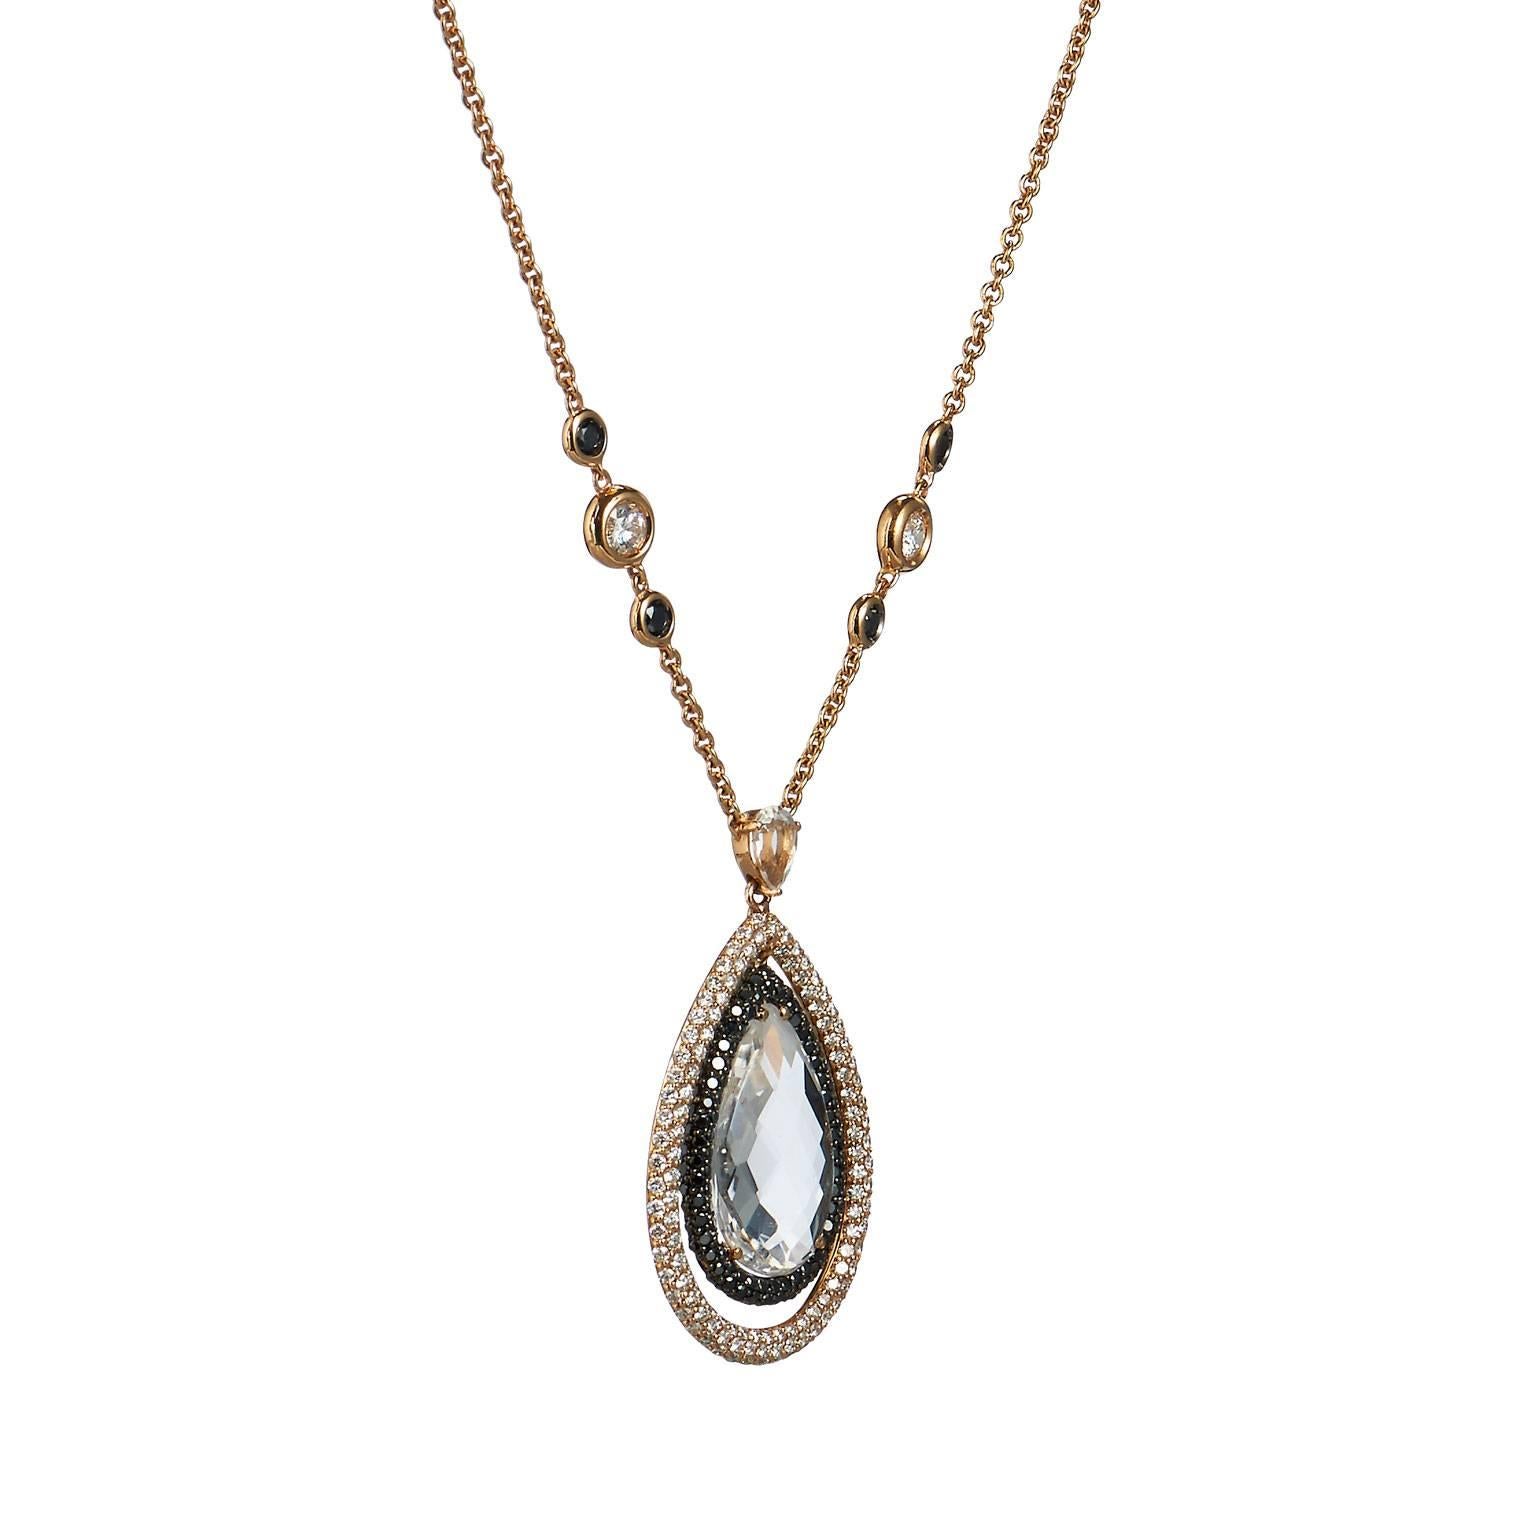 A beautiful statement piece, this Italian necklace features an impressive 8.50ct topaz suspended by an 18kt rose gold chain. Stations of black diamonds totaling 1.86ct and white diamonds totaling 2.52ct graded G-SI creates a glistening design upon